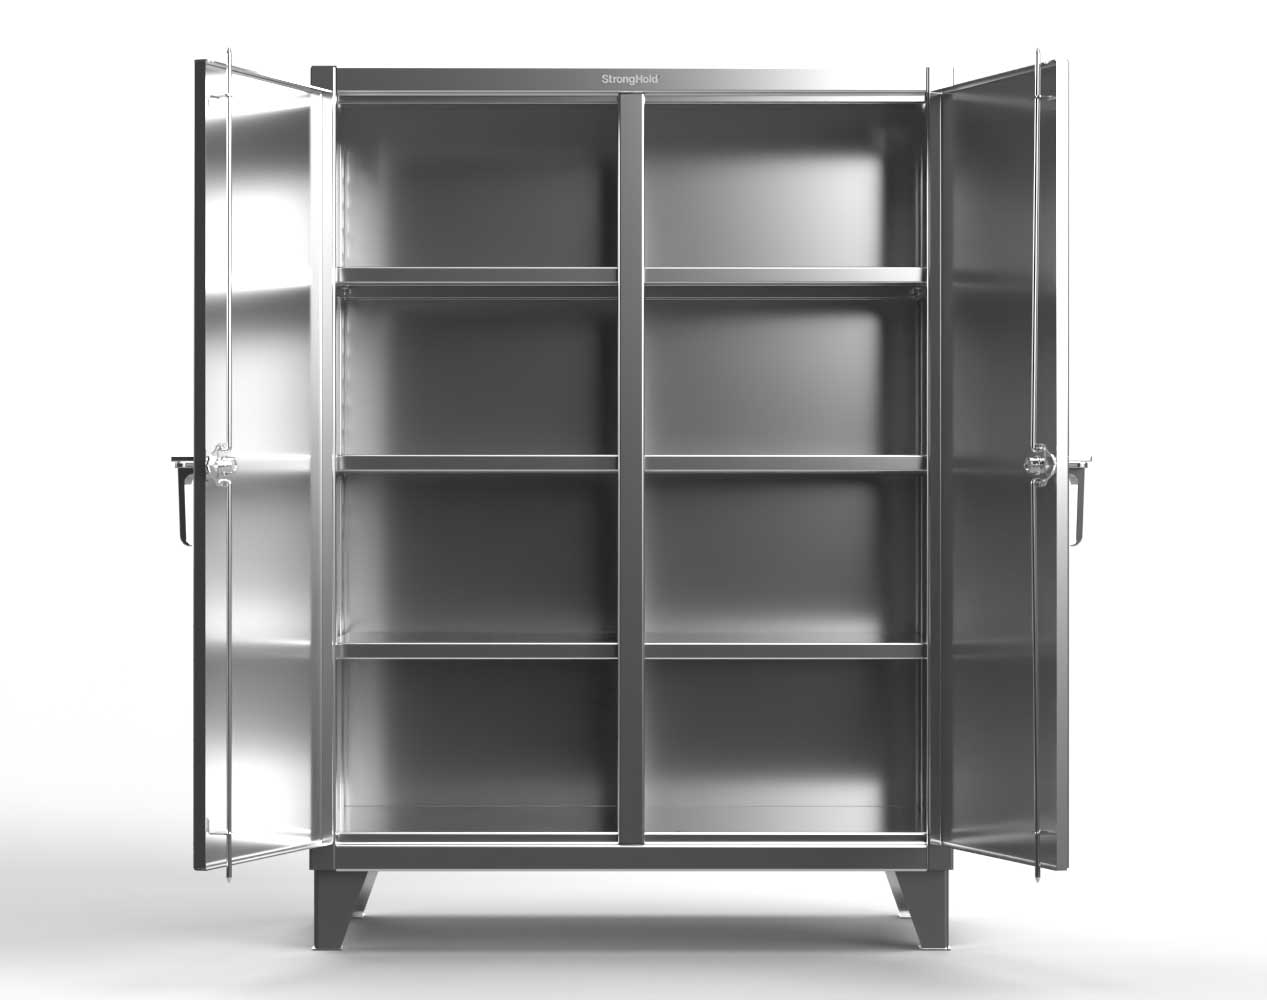 Extreme Duty 12 GA Stainless Steel Double Shift Cabinet with 6 Shelves - 72 In. W x 24 In. D x 66 In. H